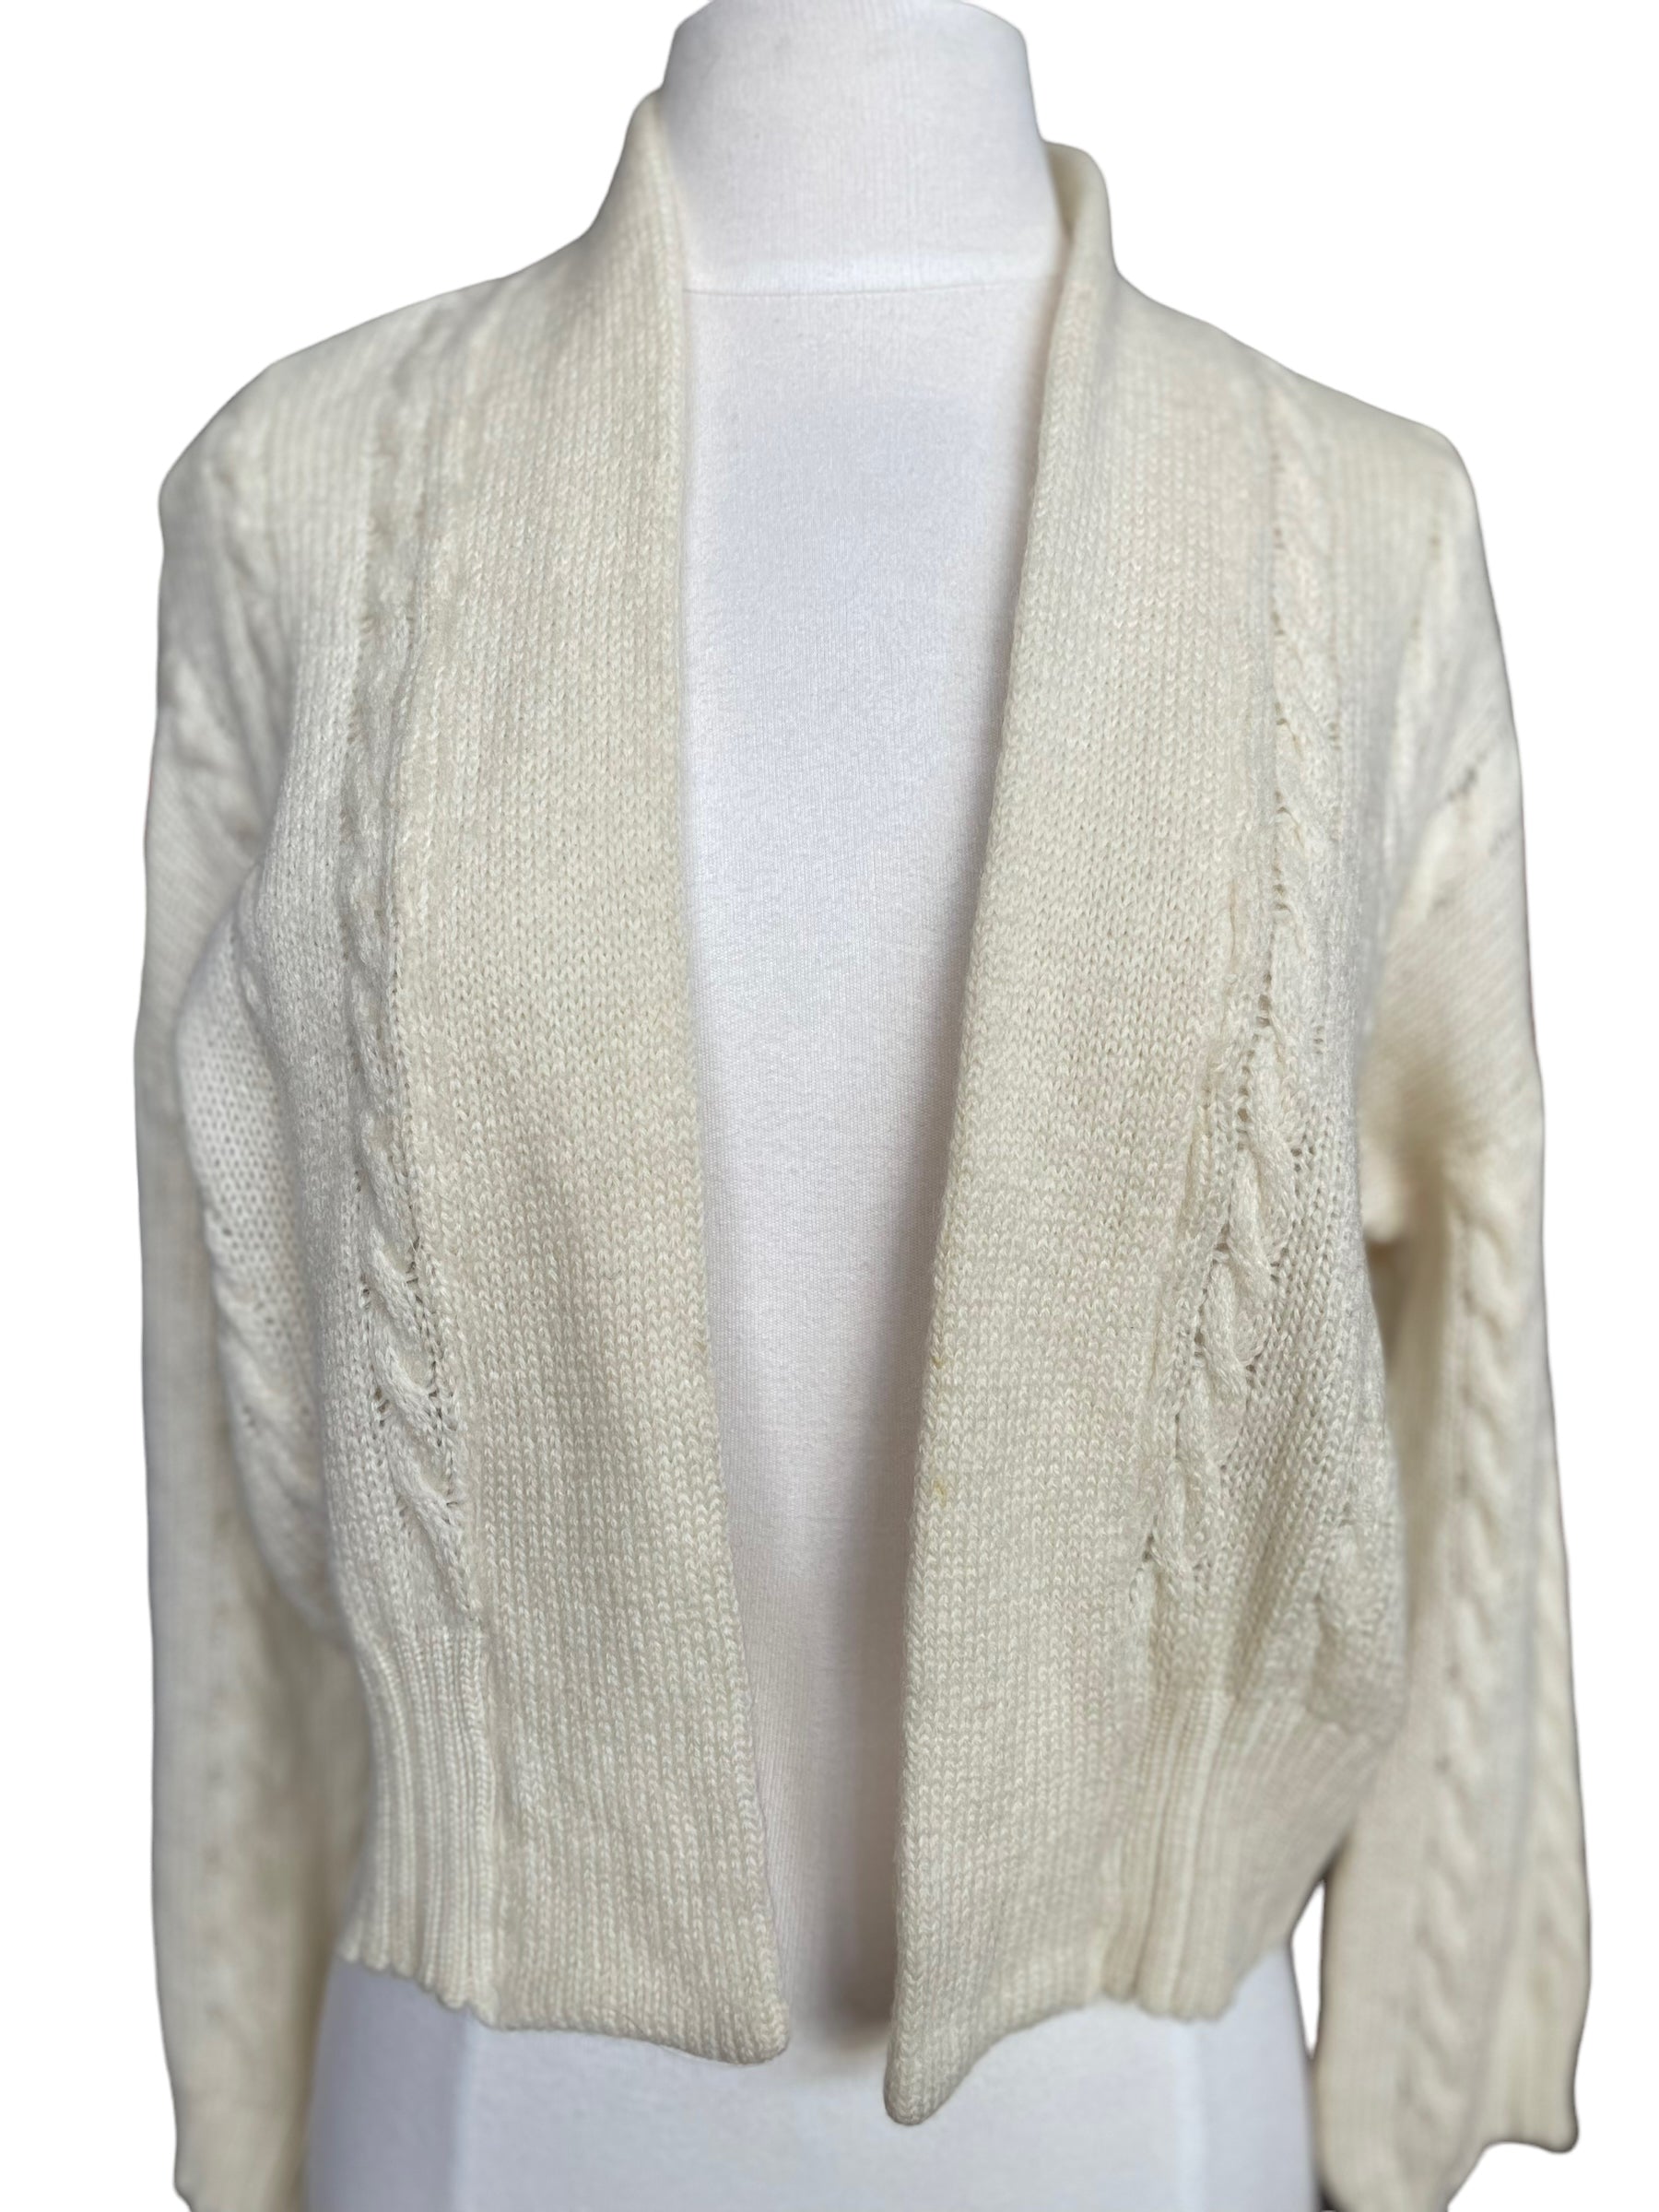 Front view of Vintage 1950s Cable Knit Cardigan Sweater | Barn Owl Seattle | Seattle True Vintage